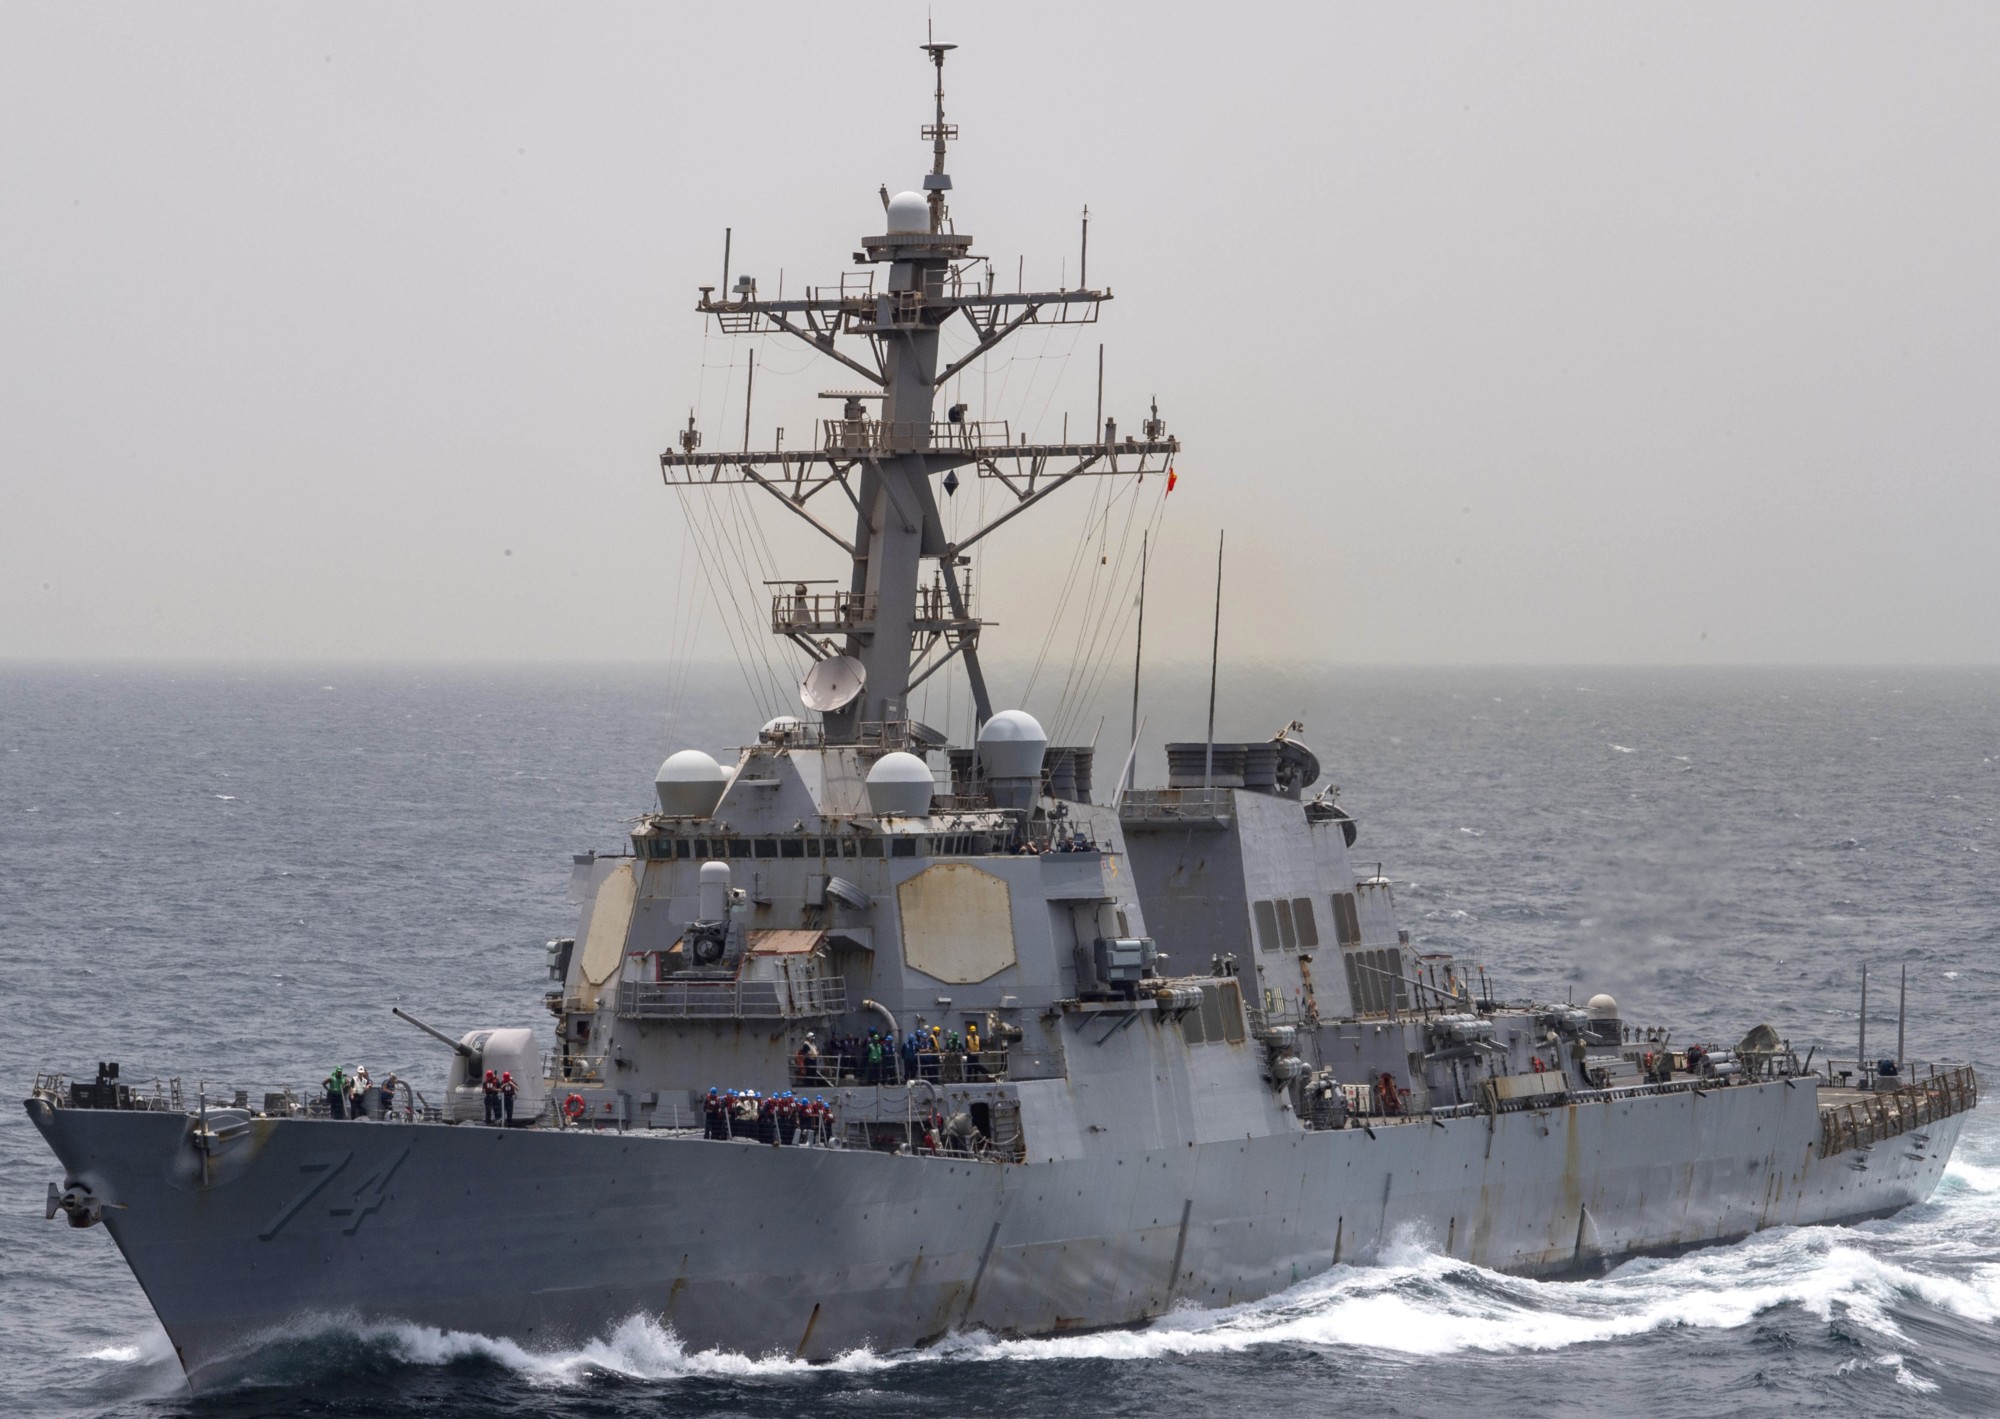 ddg-74 uss mcfaul guided missile destroyer arleigh burke class aegis us navy gulf of aden 65